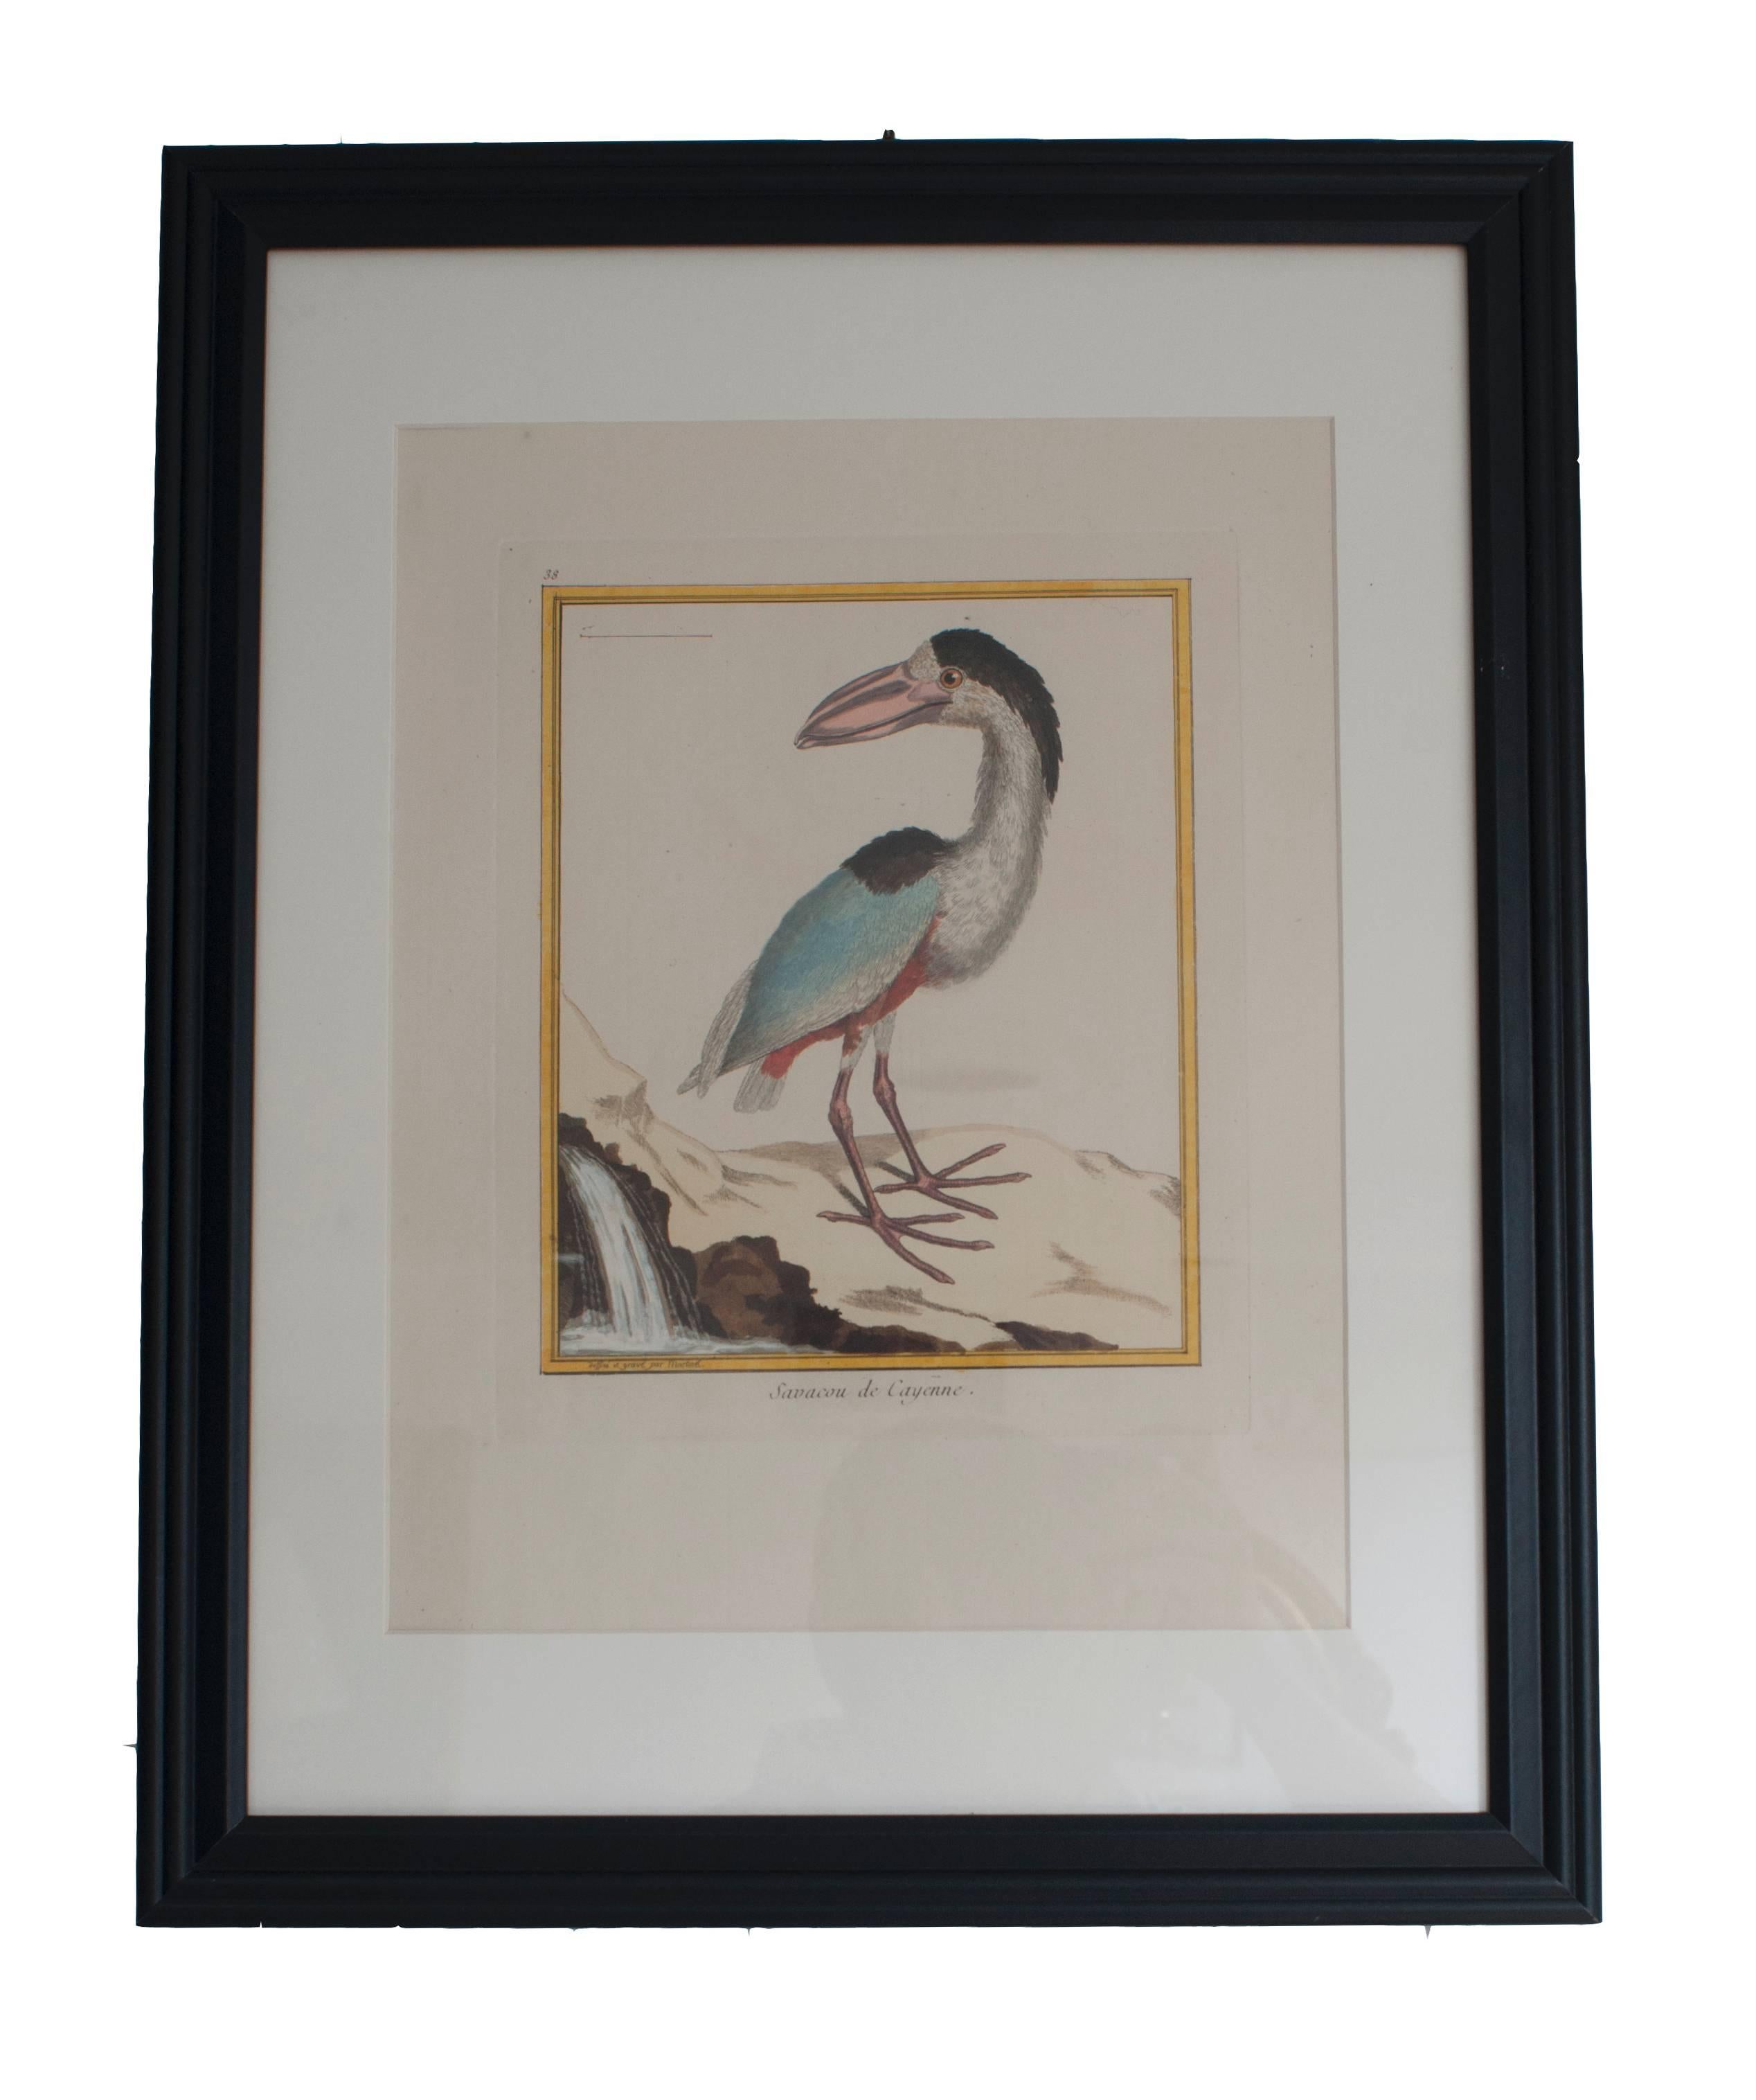 Glass Six Hand Colored Engravings of Birds in New Frames & Matting. By Martinet. For Sale